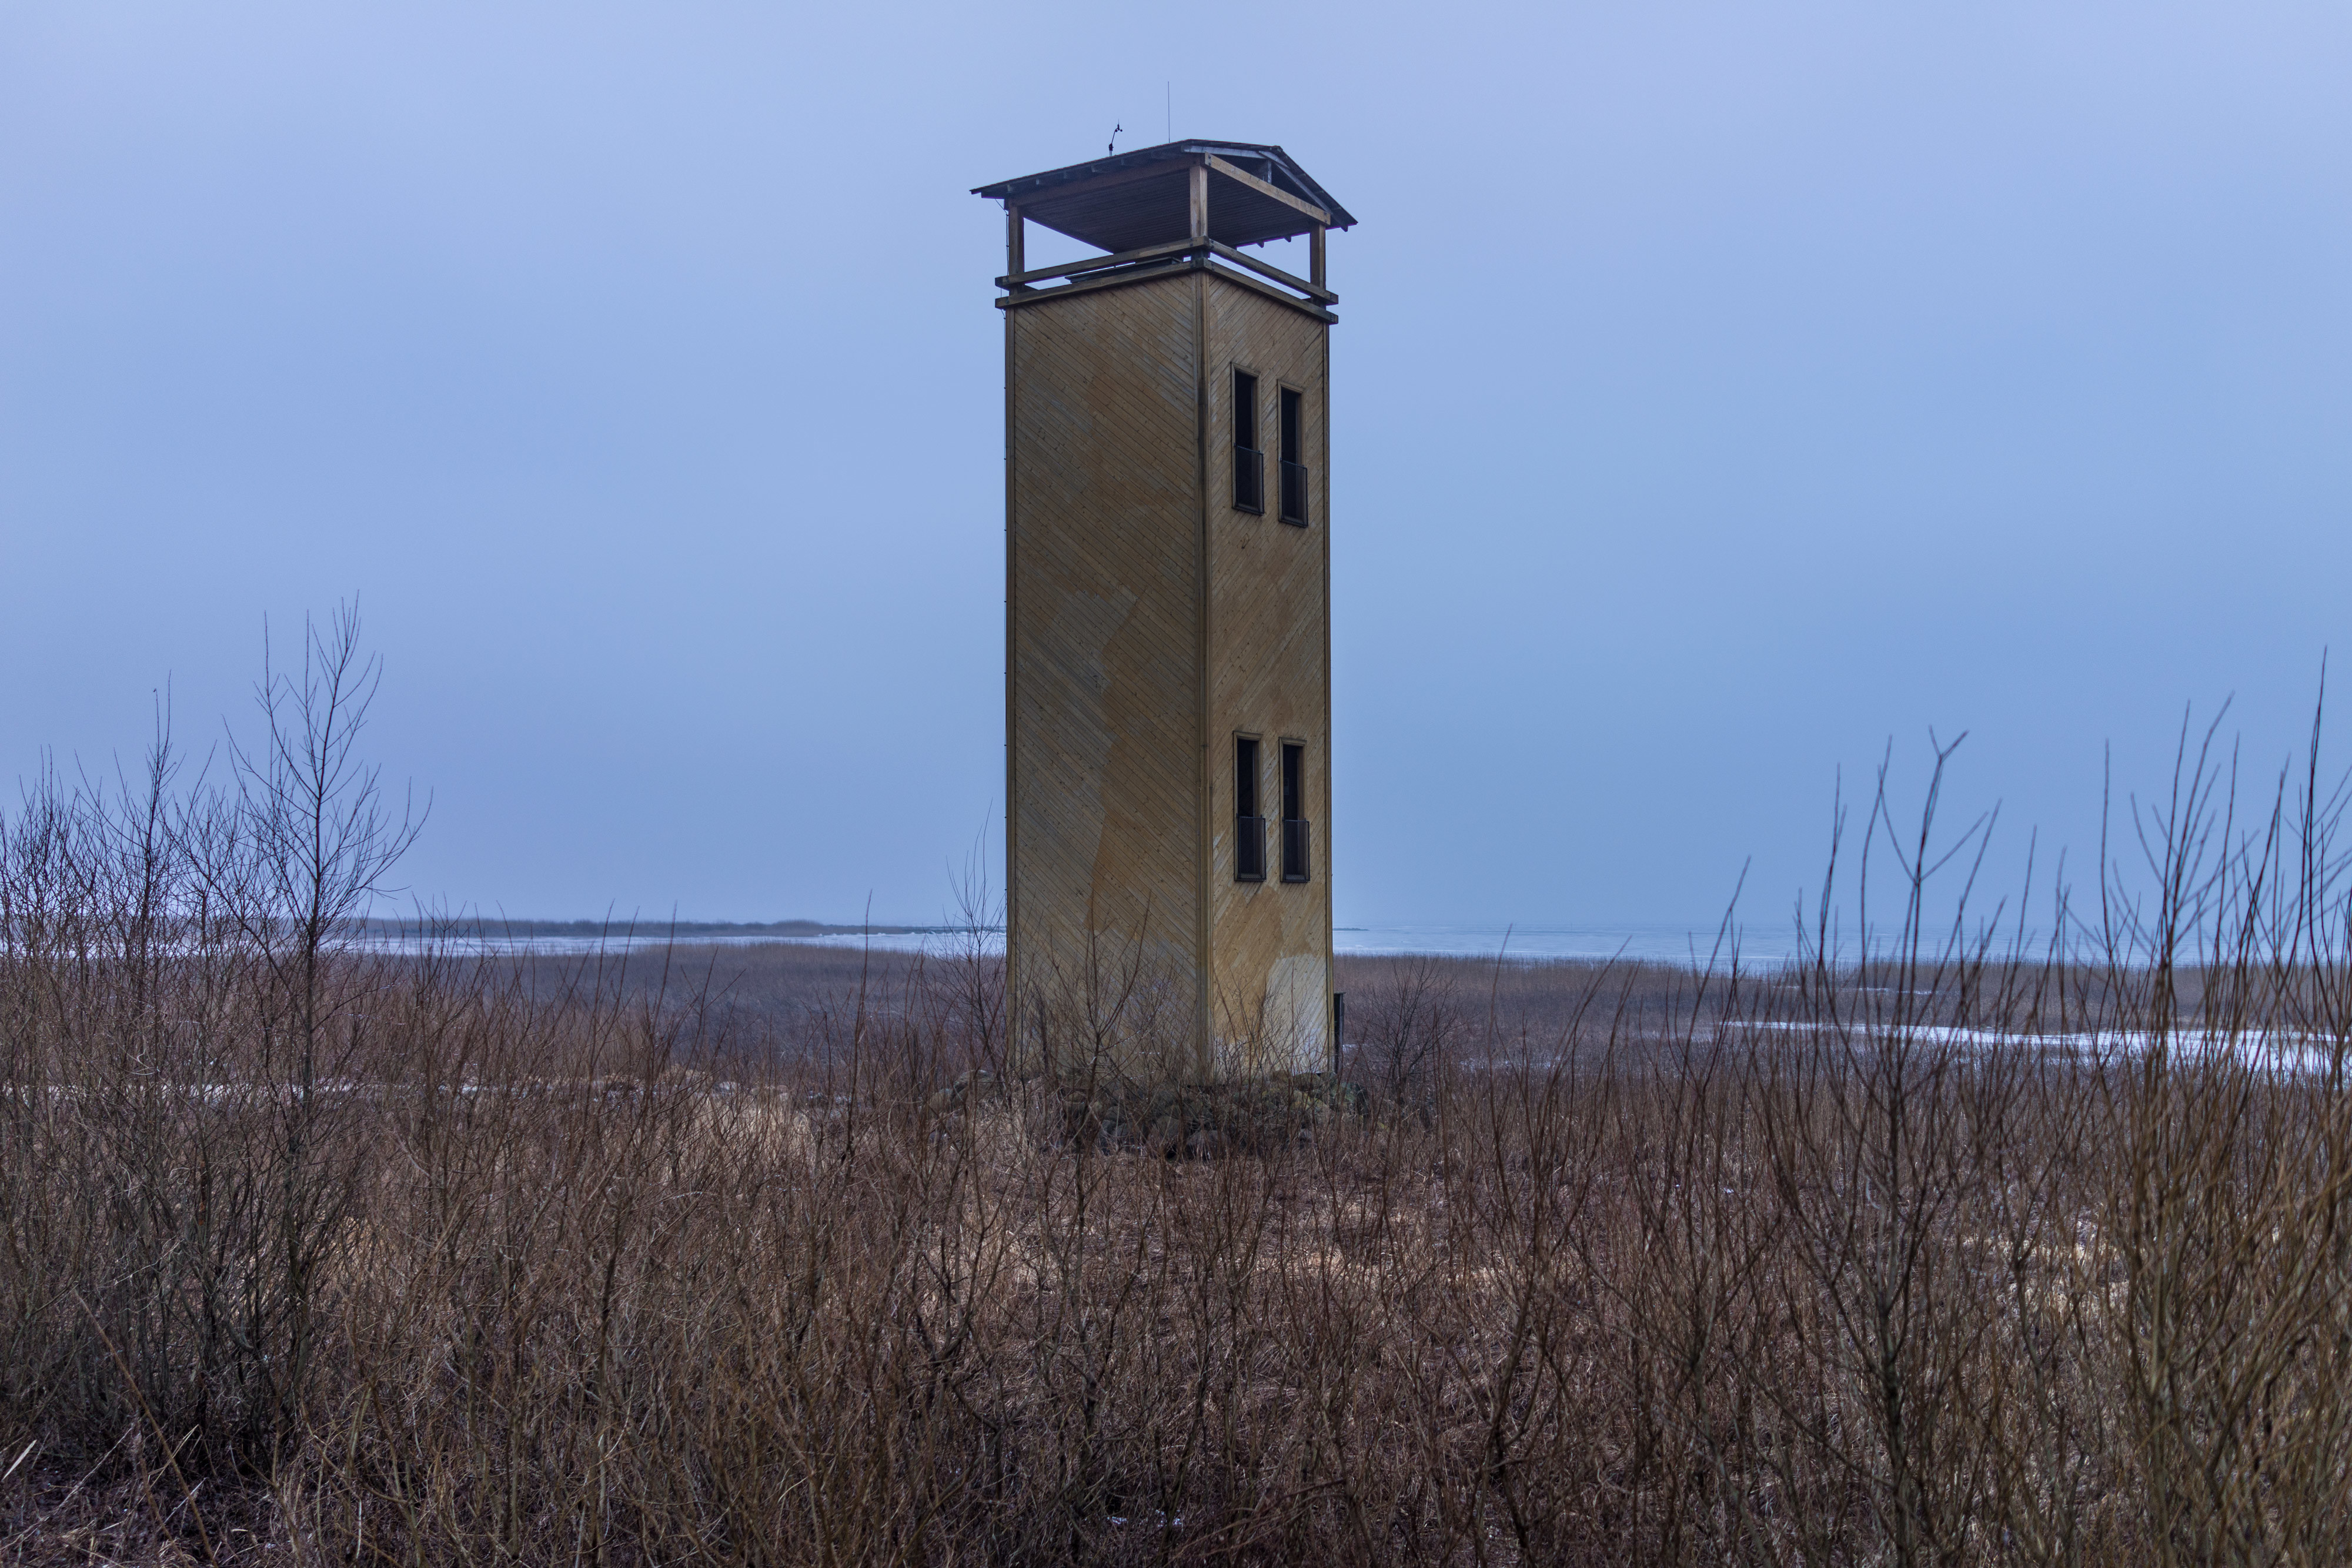 A lookout tower on the northern shore of Võrtsjärv. The miniature house-like buildings in lifeless landscapes add a layer of additional emptiness to the already deserted winterscape. The warmth pours into you by just standing and watching this silence.